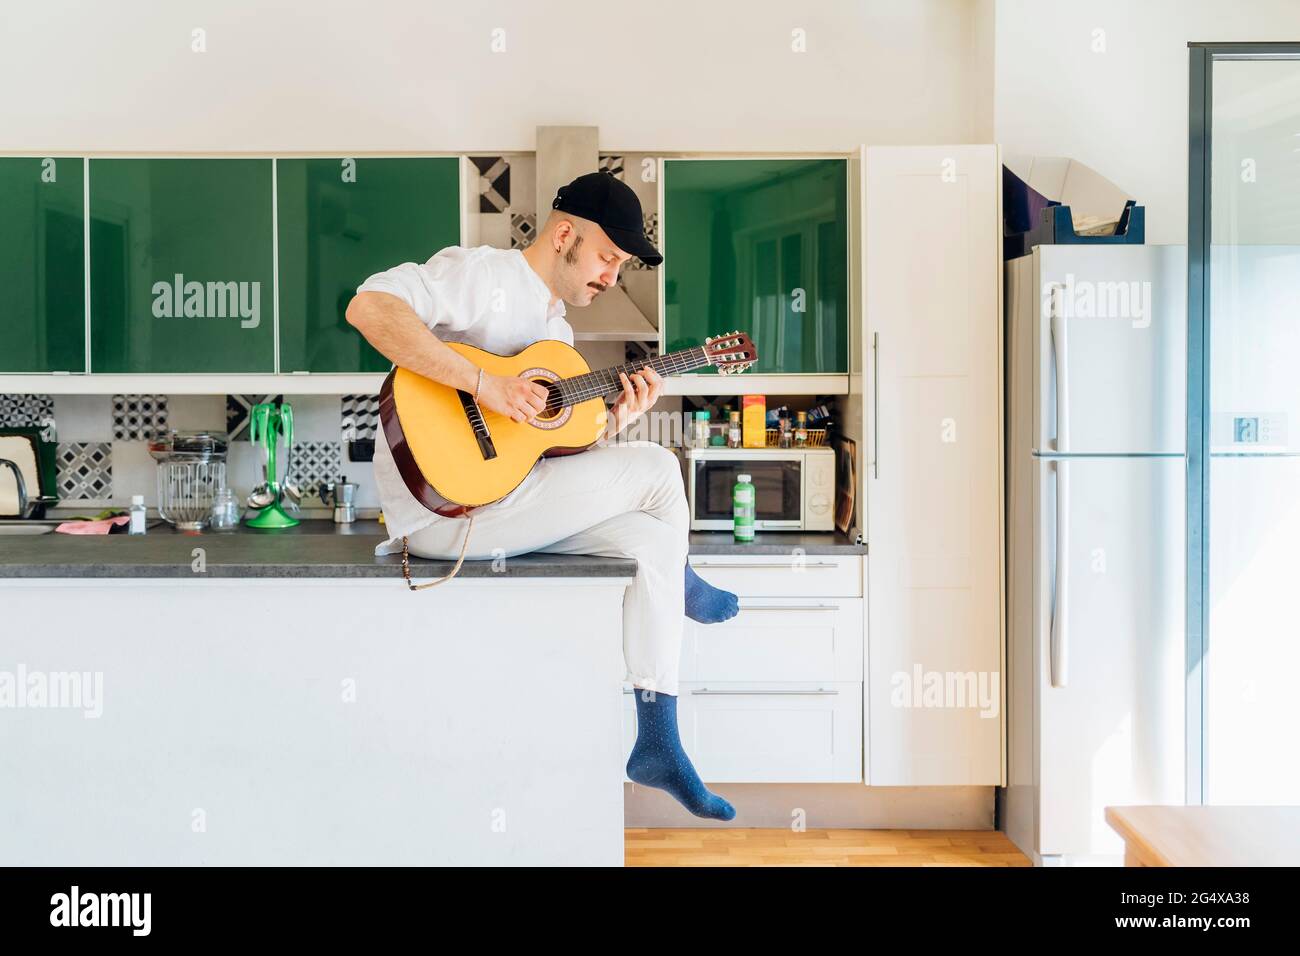 Male composer with eyes closed playing guitar on kitchen island at home Stock Photo